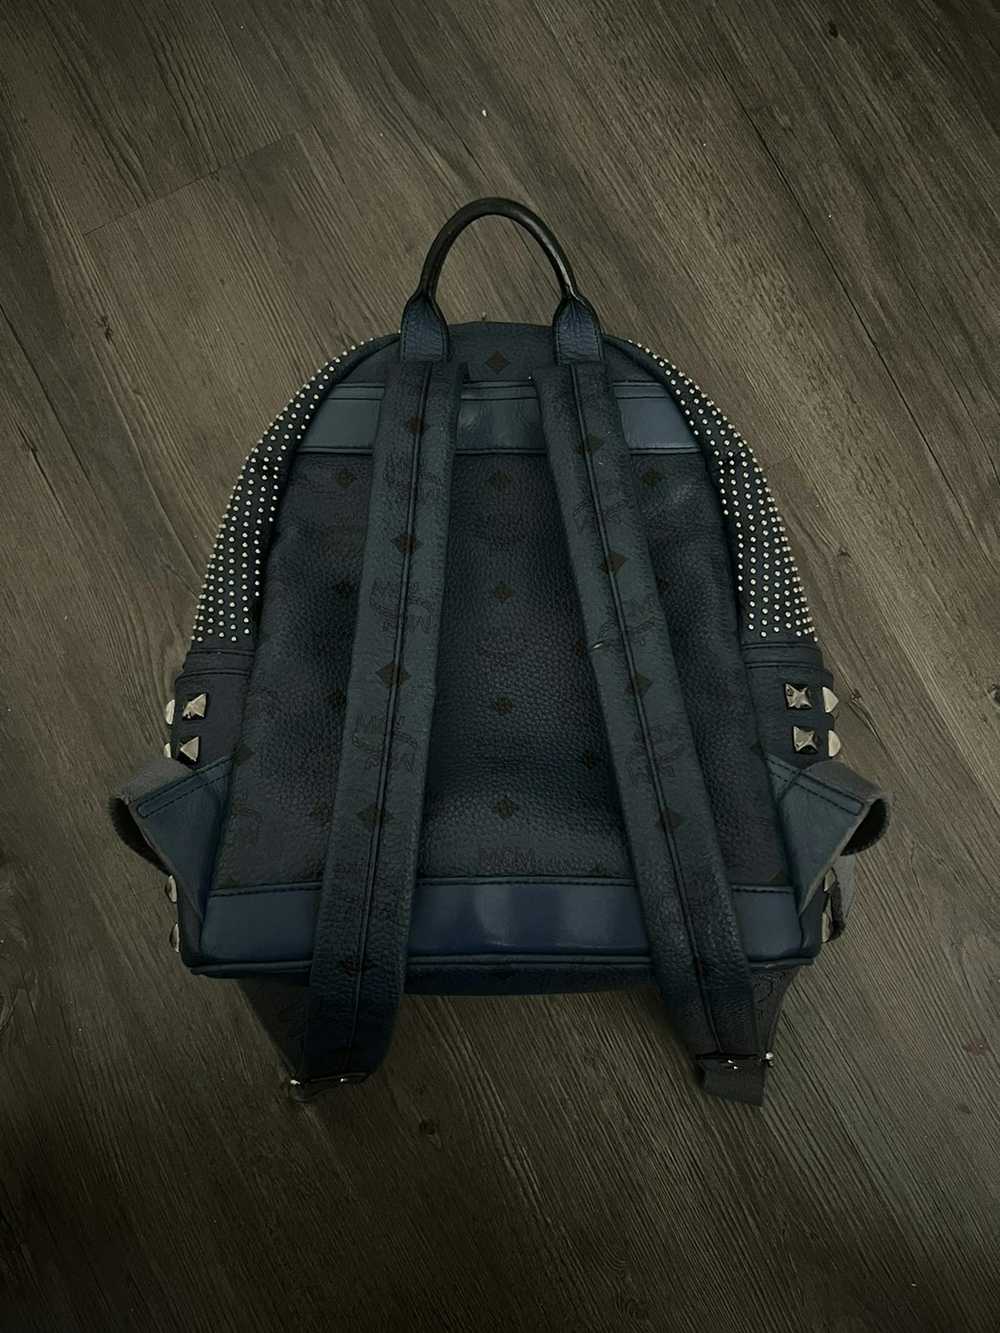 MCM Mcm small studded backpack - image 4